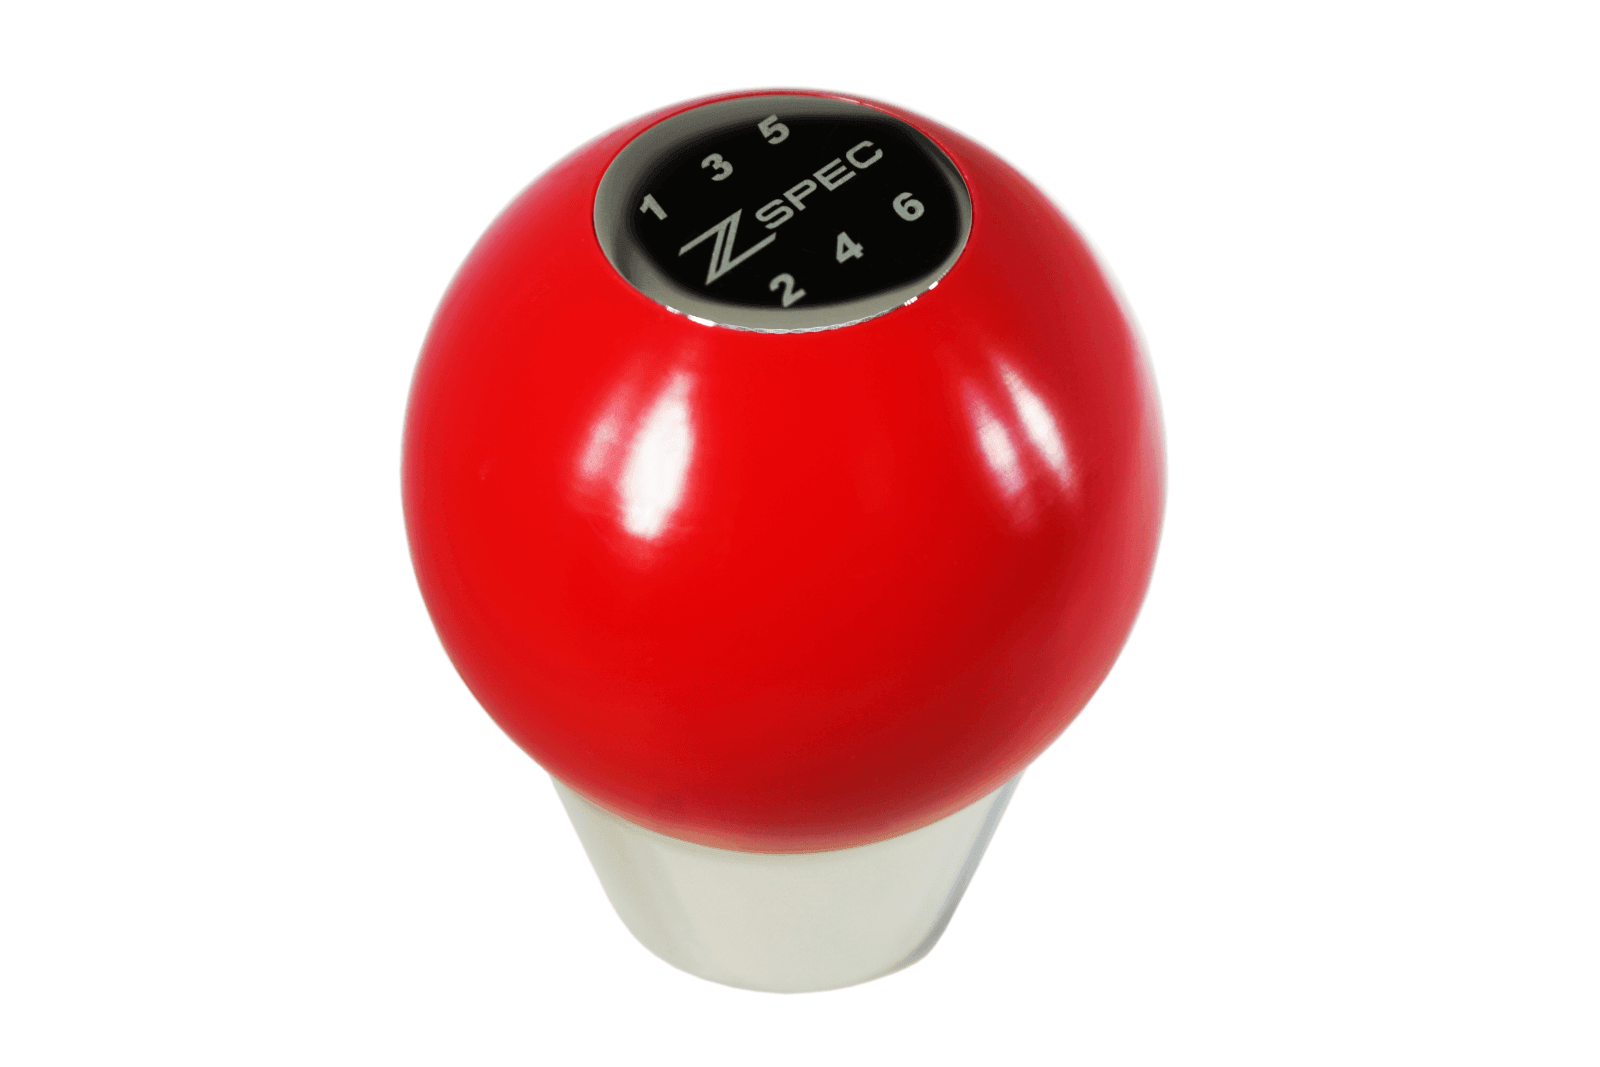 ZSPEC Shift Knob, M8-1.25, Delrin & Stainless, 6-Speed Shift Pattern Coin  Interior Performance Upgrade Accessory Dress Up Bolts Fasteners Hardware Matters SUS304 Black Red Blue White Car Auto Vehicle